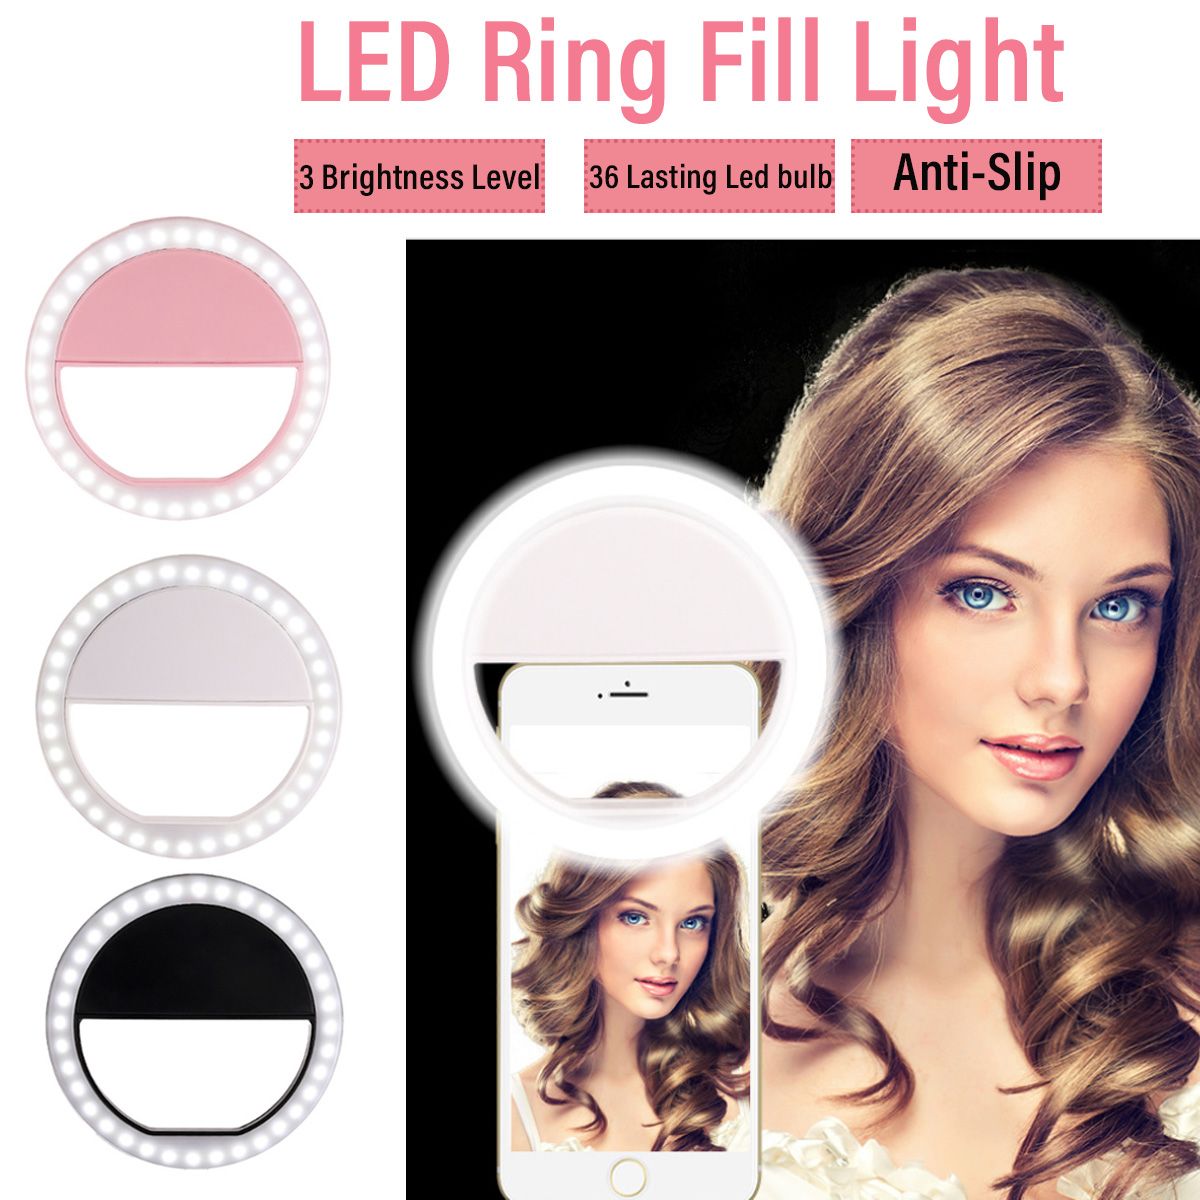 Round-LED-Ring-Light-Flash-Fill-Lamp-Clip-Camera-for-Mobile-Phone-Smartphone-Selfie-Photography-Live-1695056